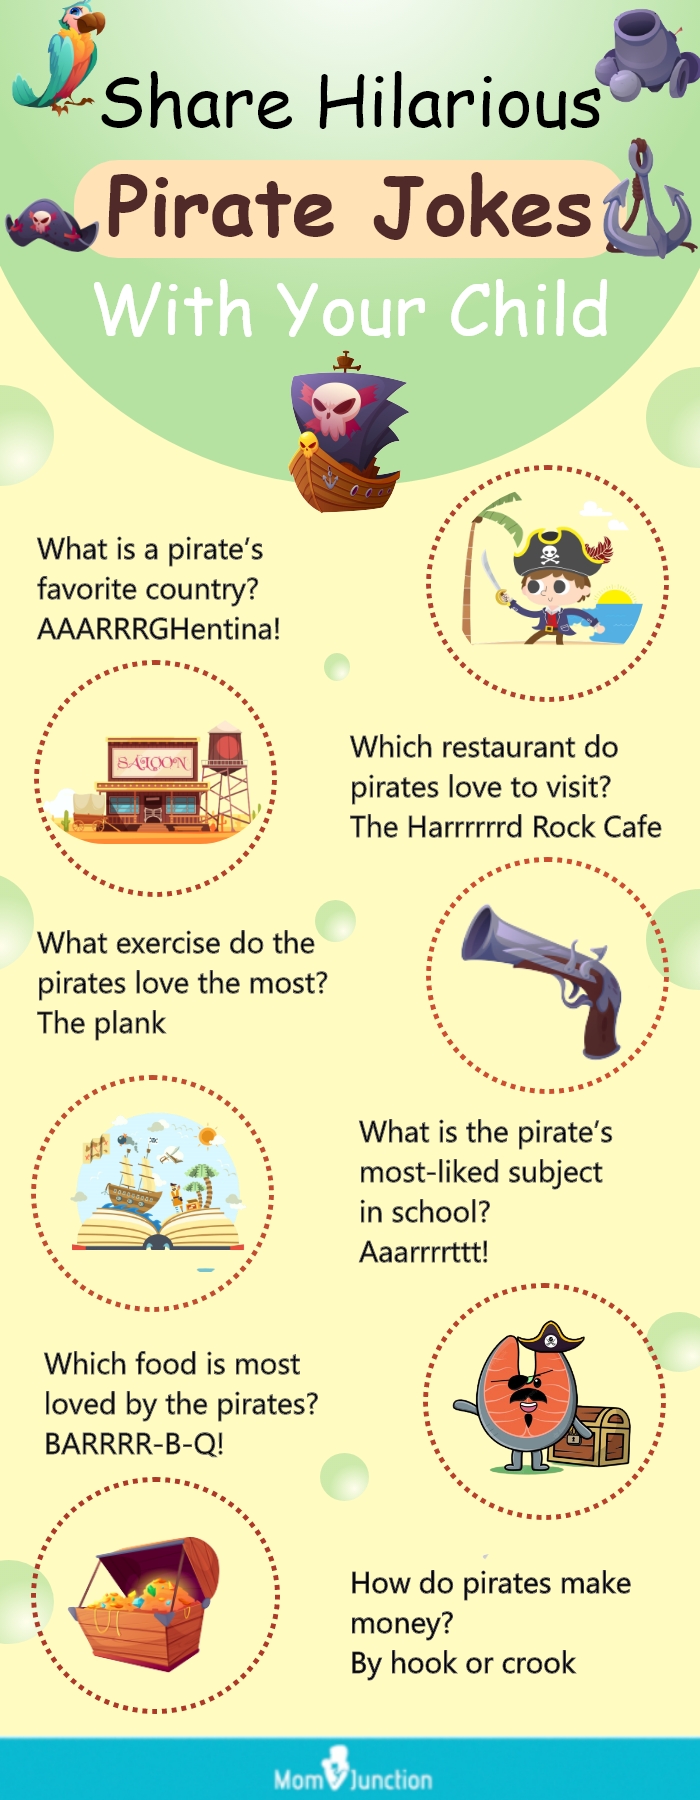 share hilarious pirate jokes with your child [infographic]